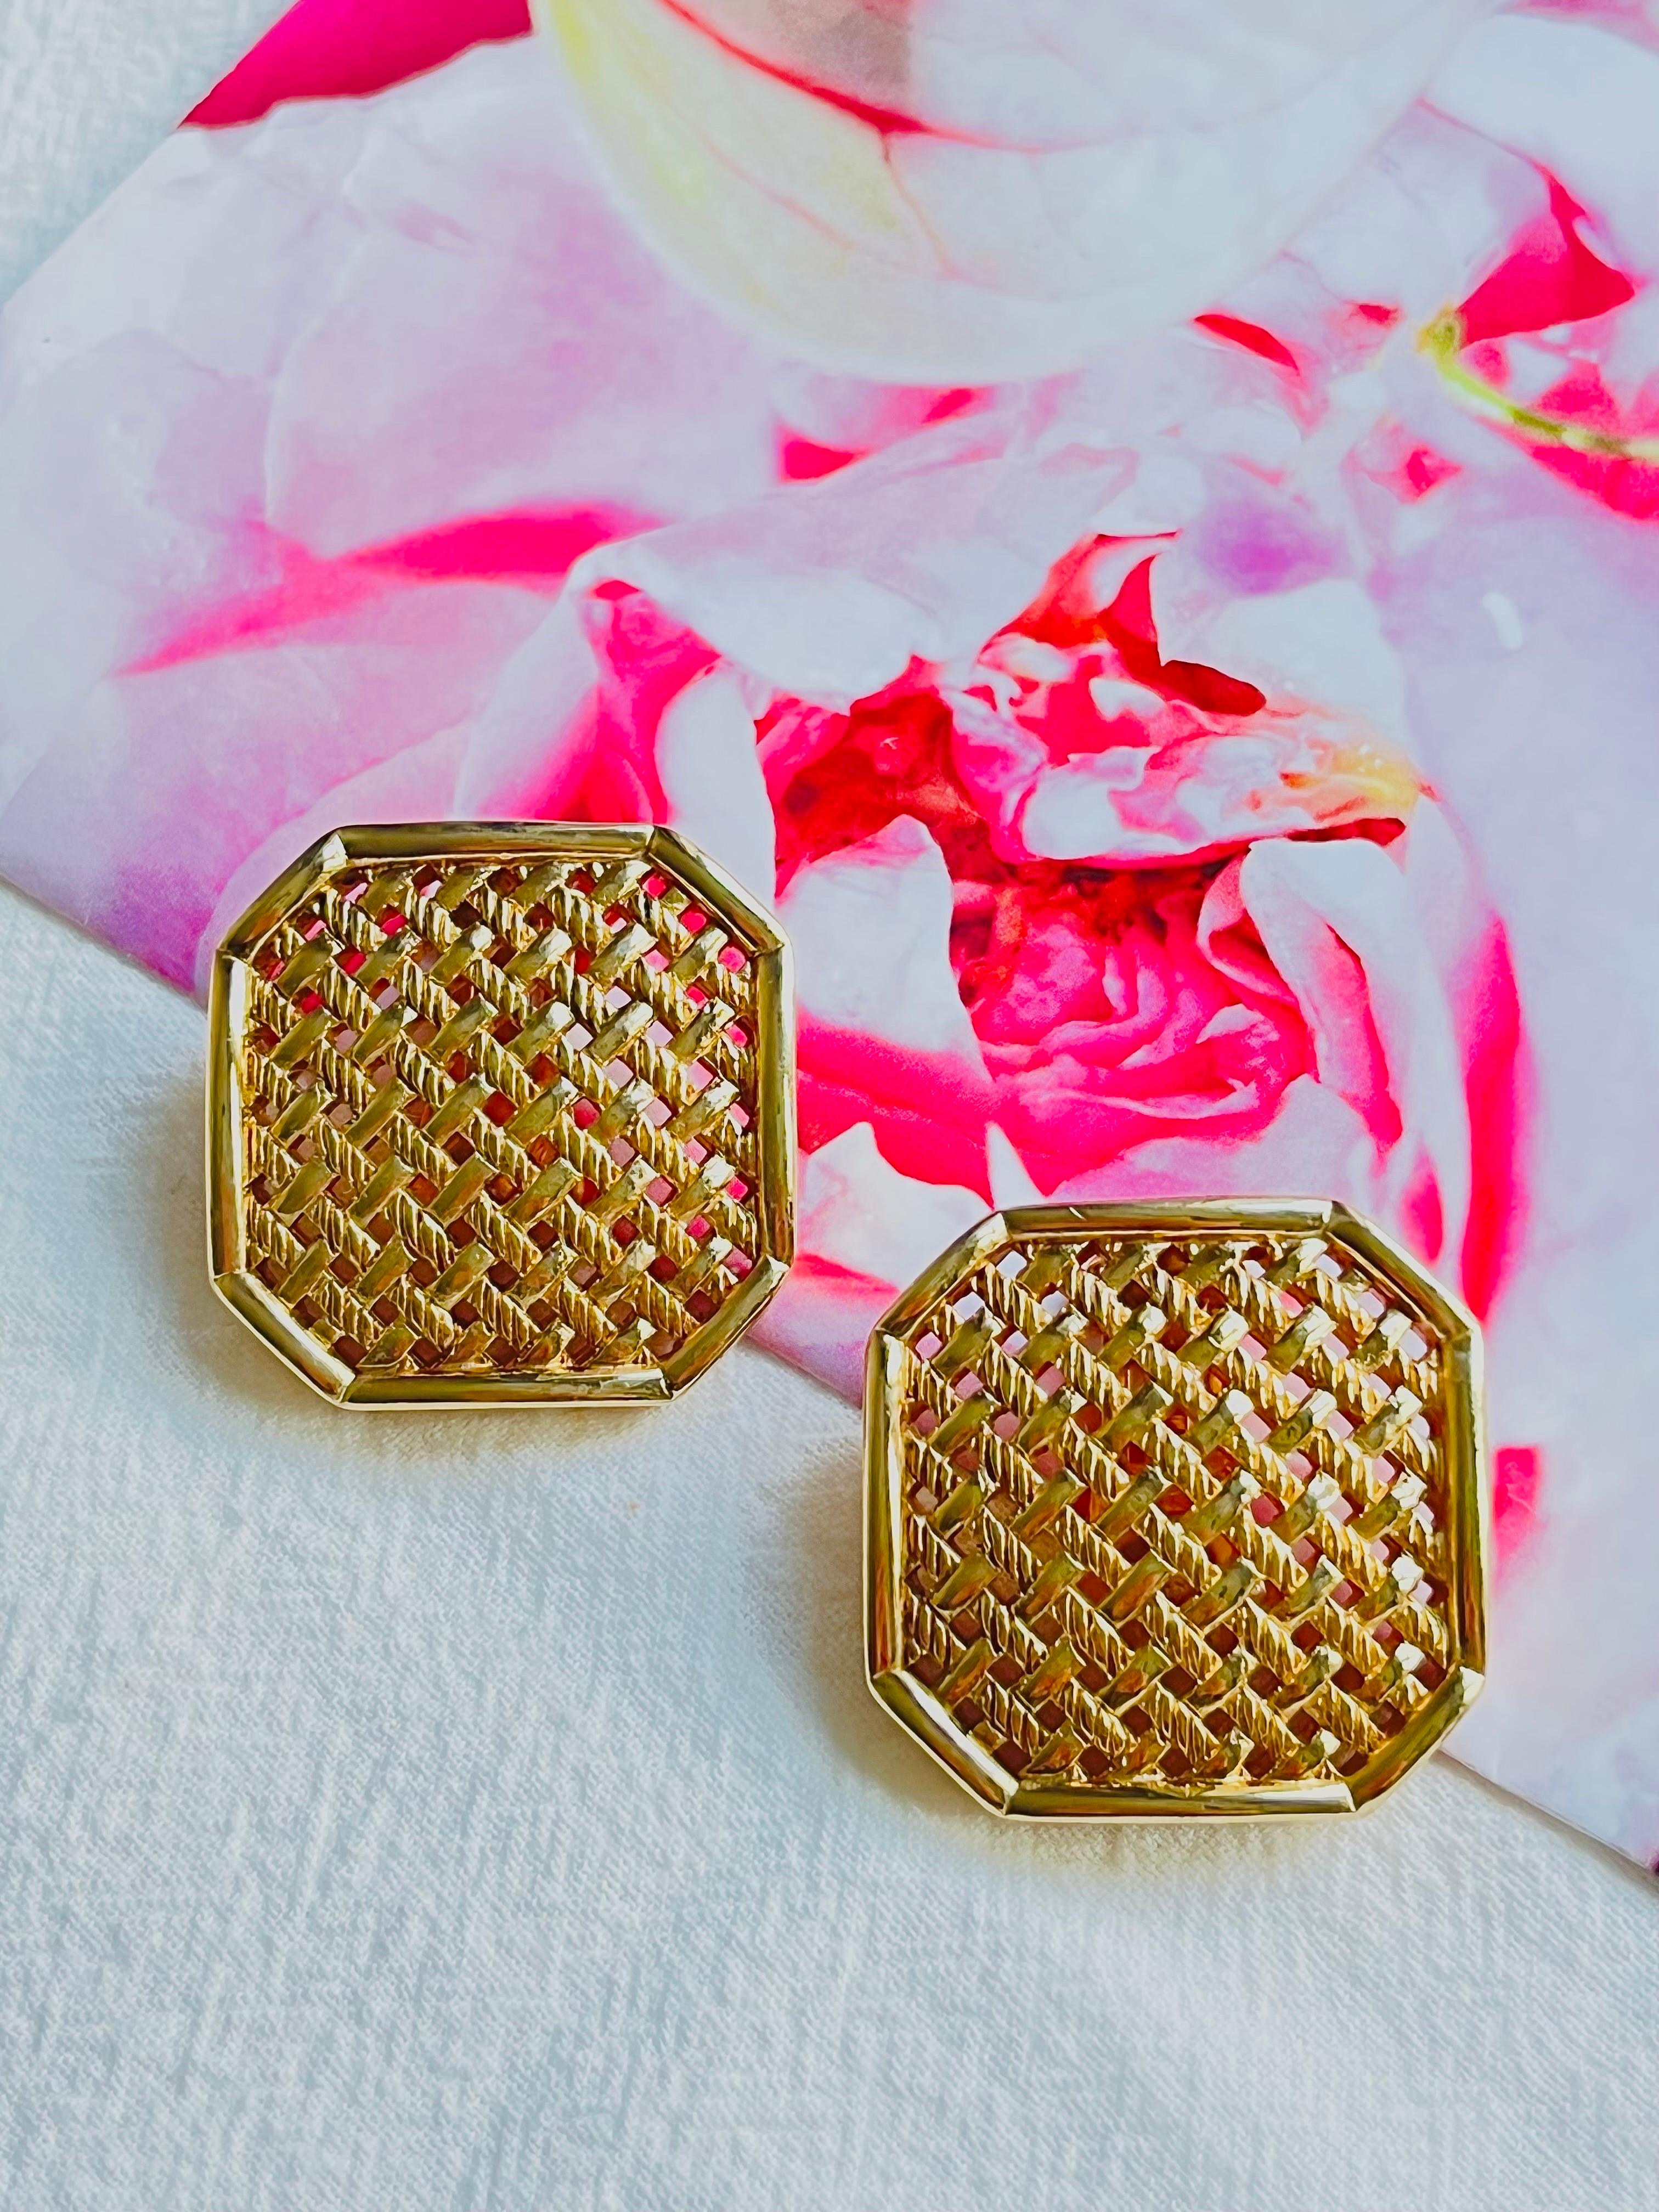 Christian Dior Vintage Large Octagon Square Openwork Mesh Statement Earrings In Excellent Condition For Sale In Wokingham, England